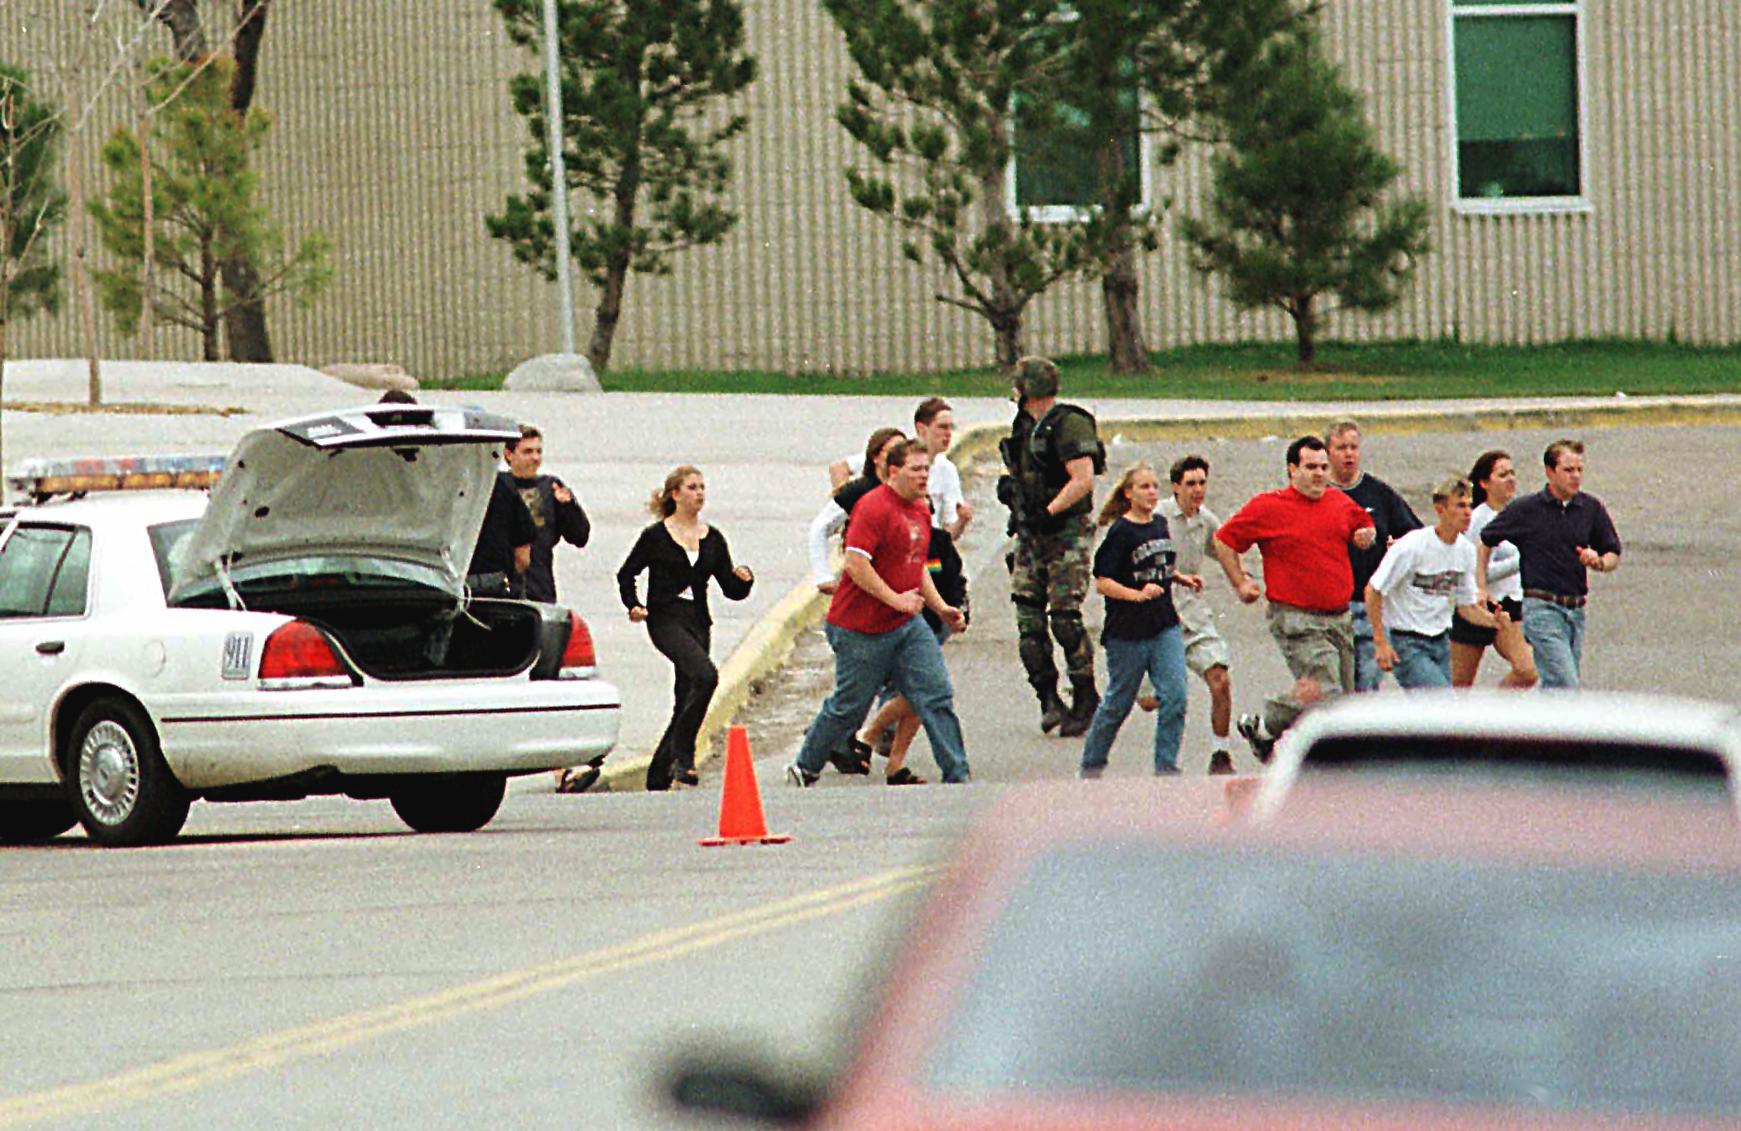 PHOTO: Students from Columbine High School run under cover from police in Littleton, Colo.